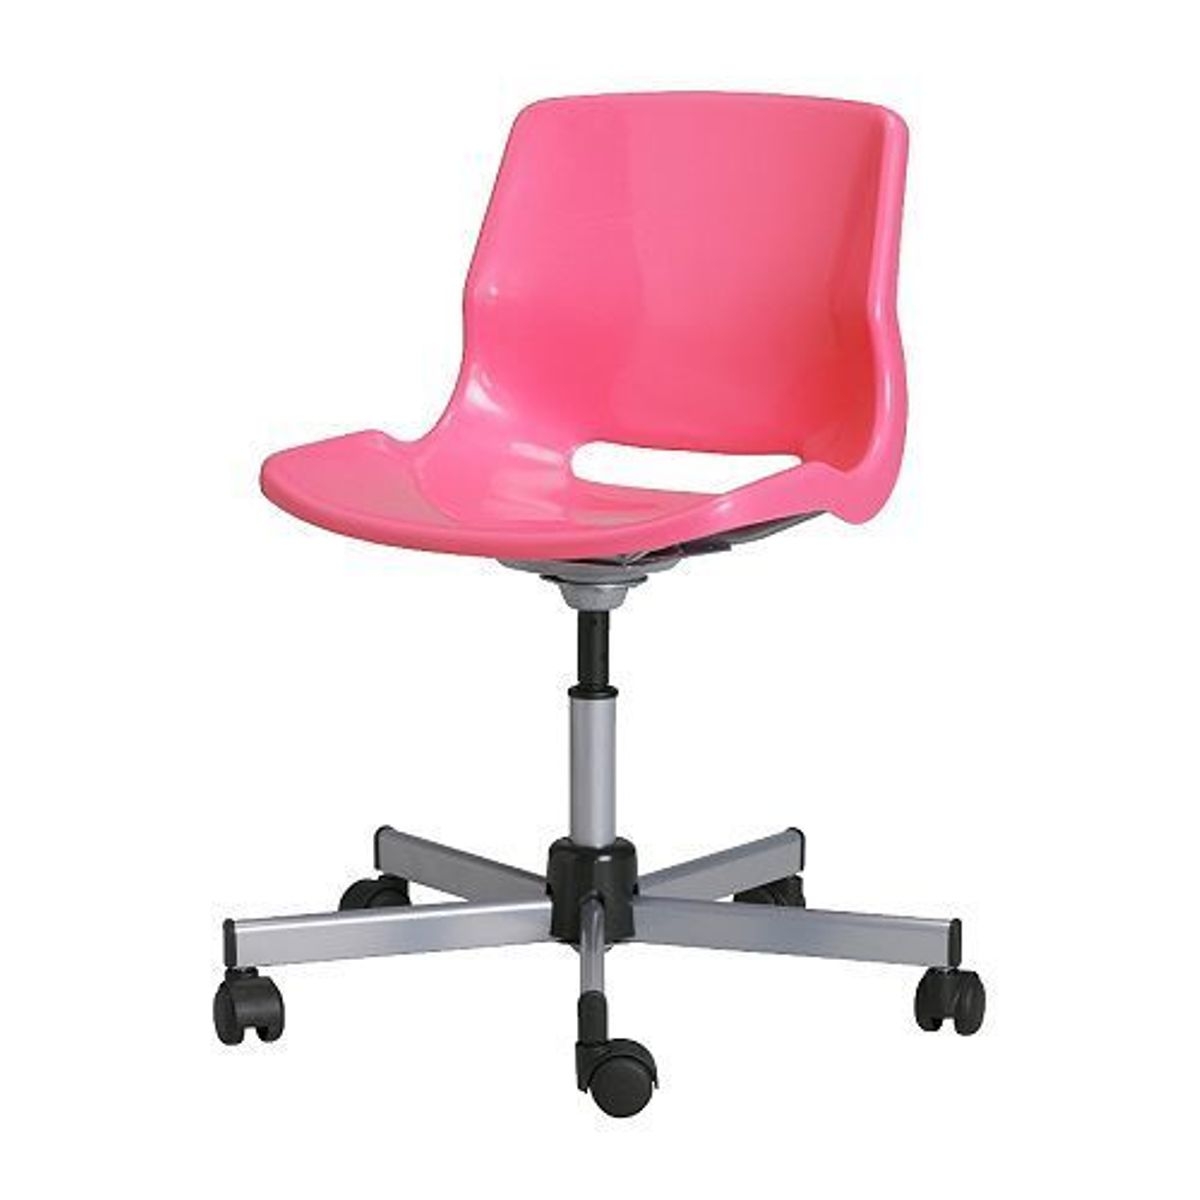 Pink office chair with arms